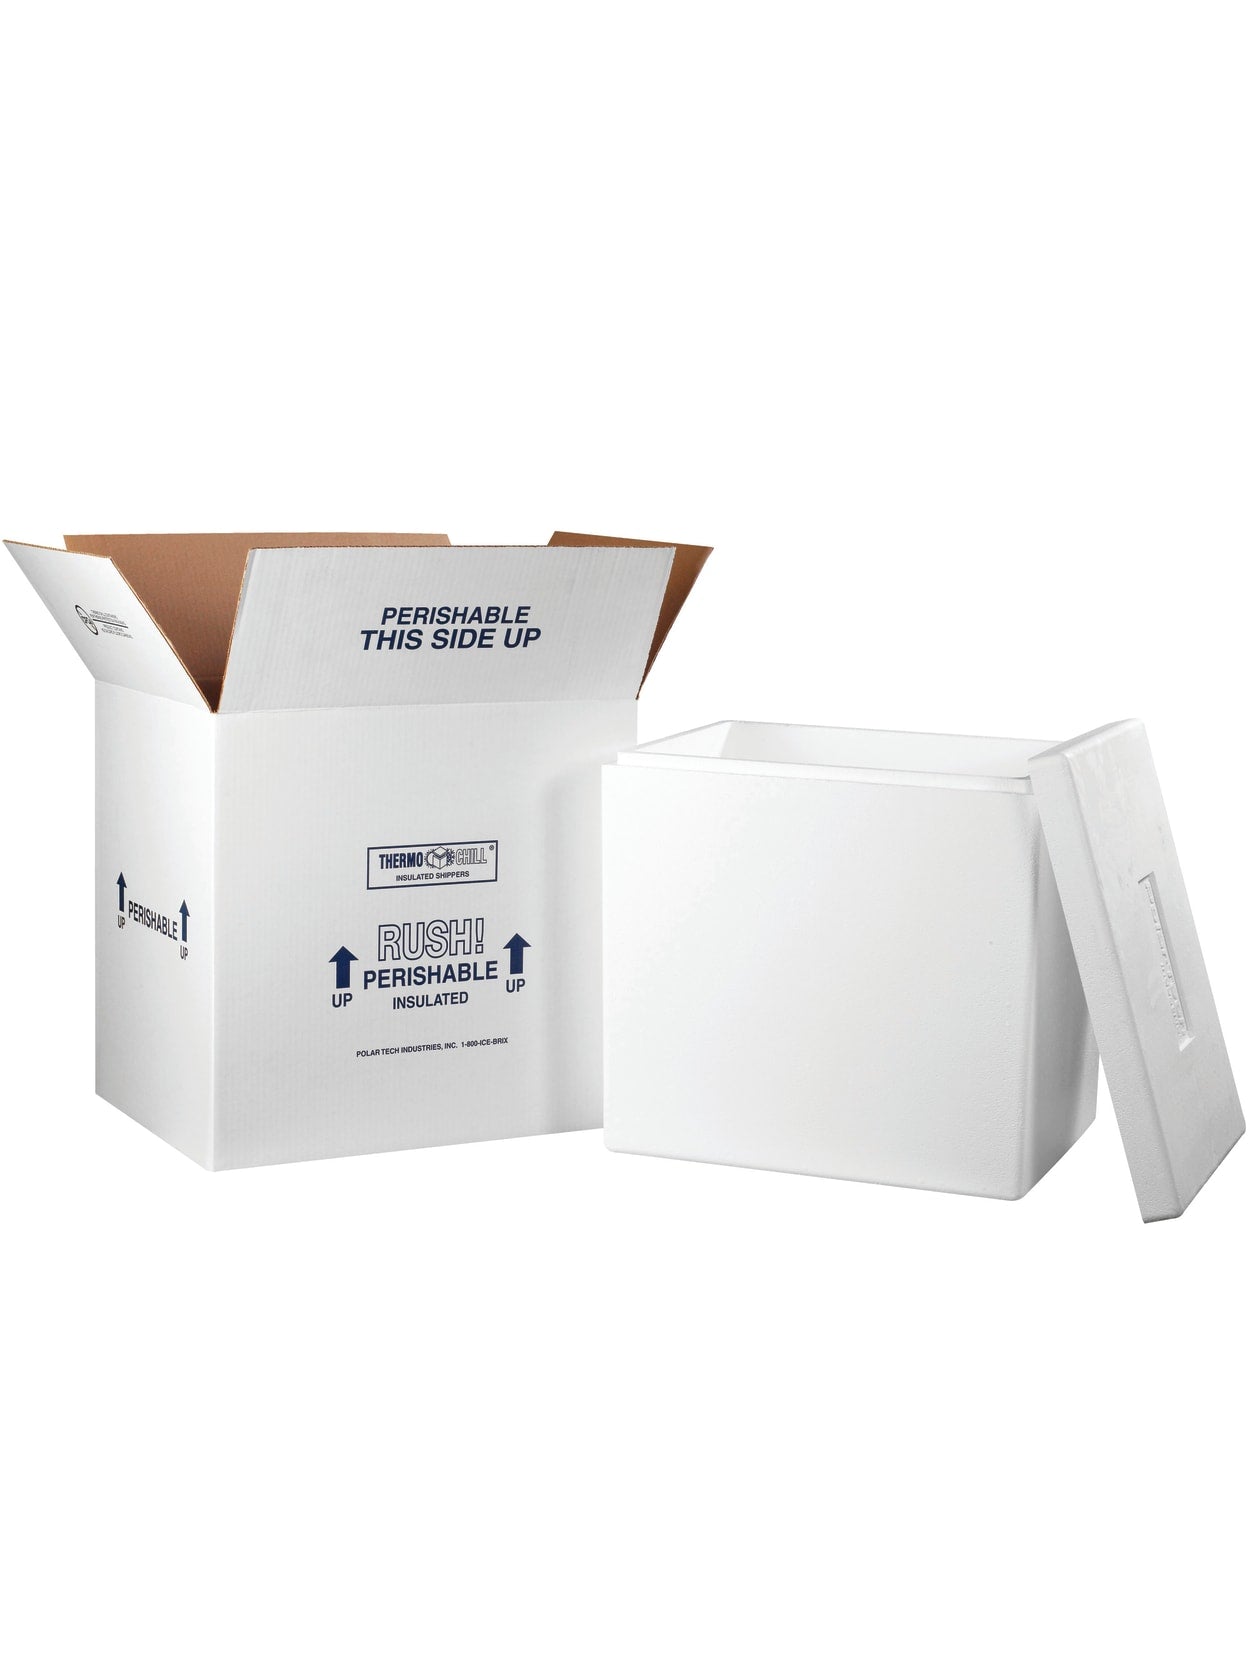 PROPAK Styrofoam Insulated Cooler Shipping Container